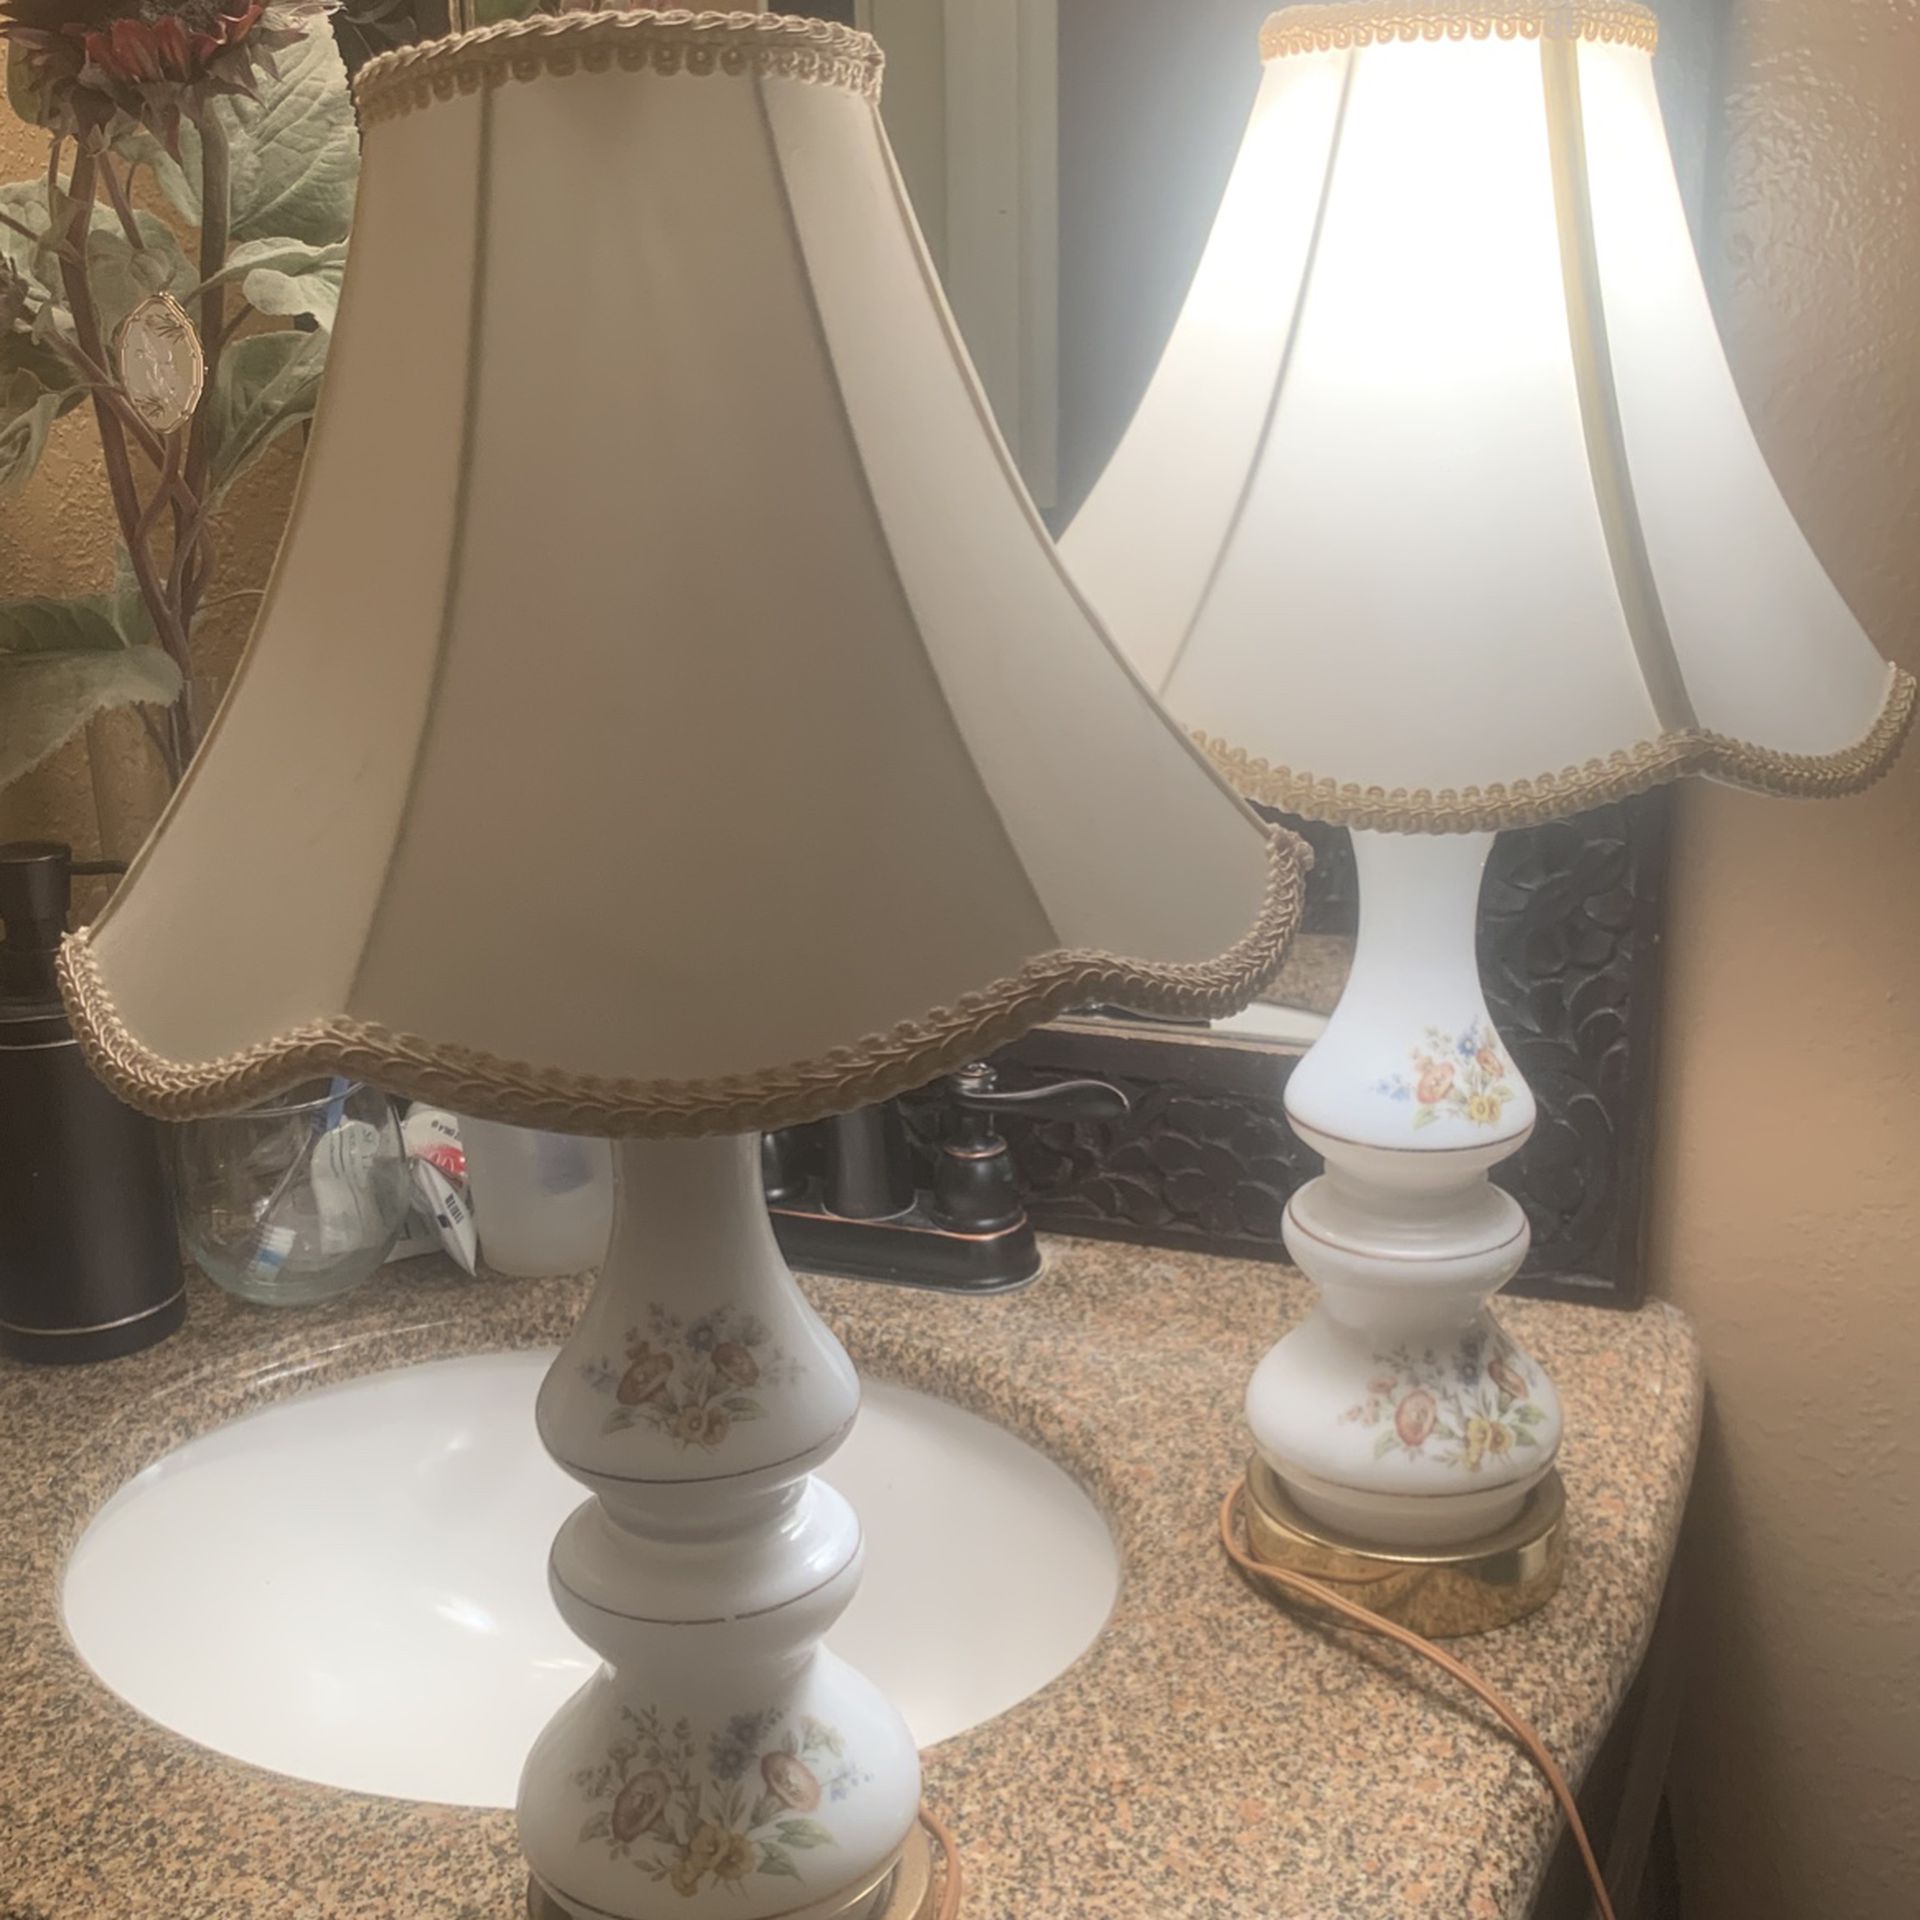 2 Vintage Lamp 15 For The Set